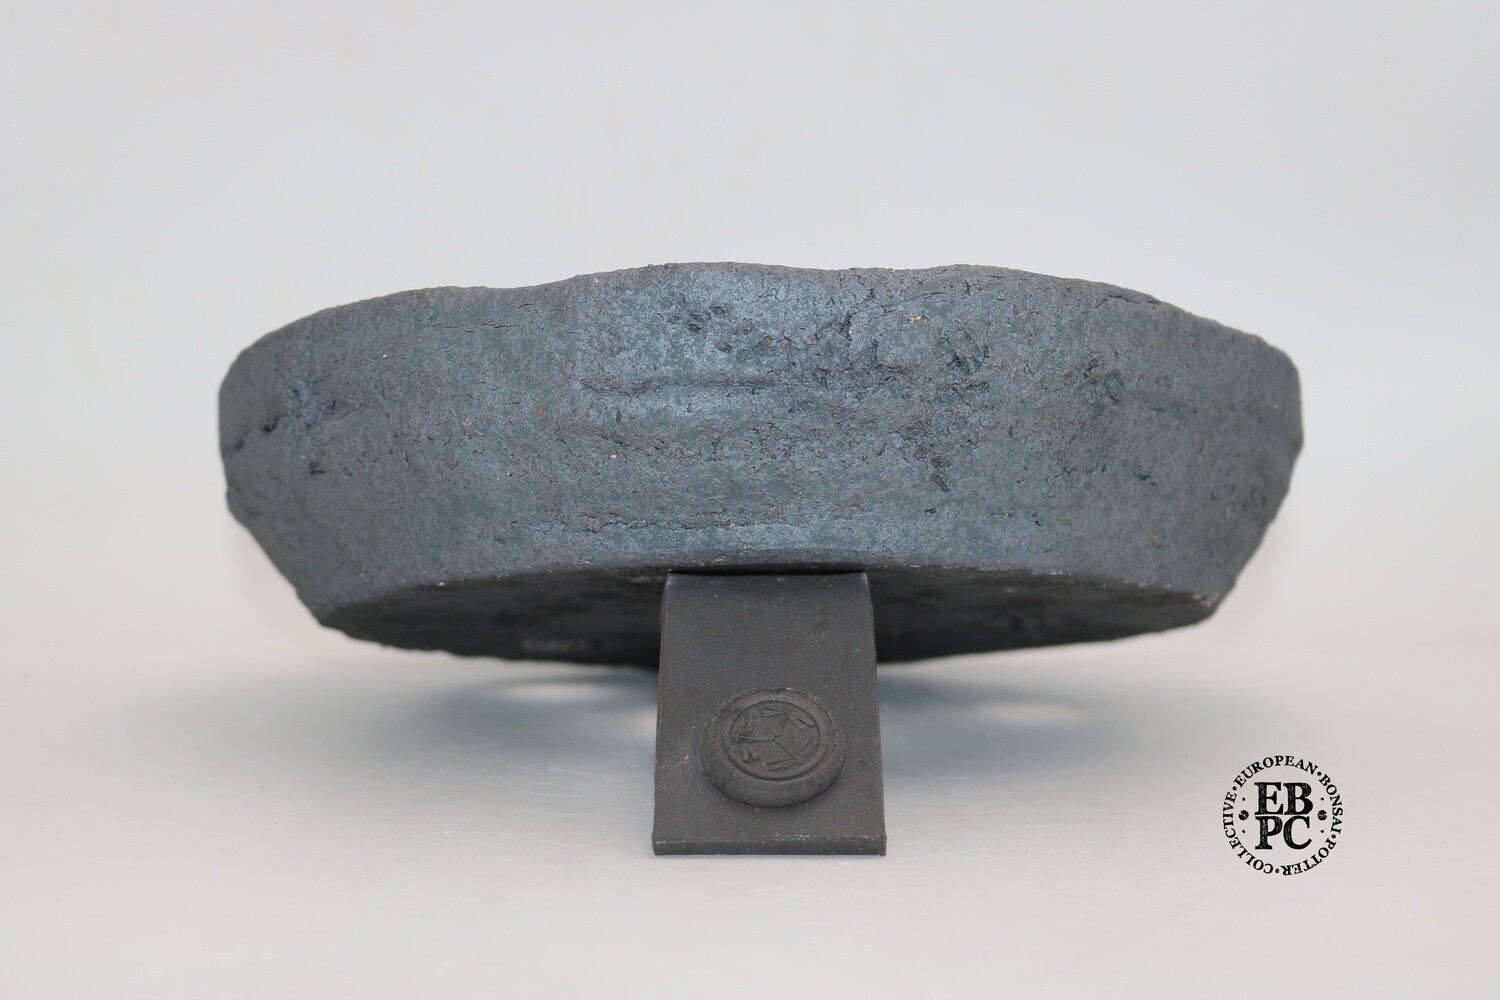 SOLD - Dragonfly Bonsai Pots. 28.8cm; Graphite Black; Grey; Round; Nanban; Aged Look; Smoother finish.